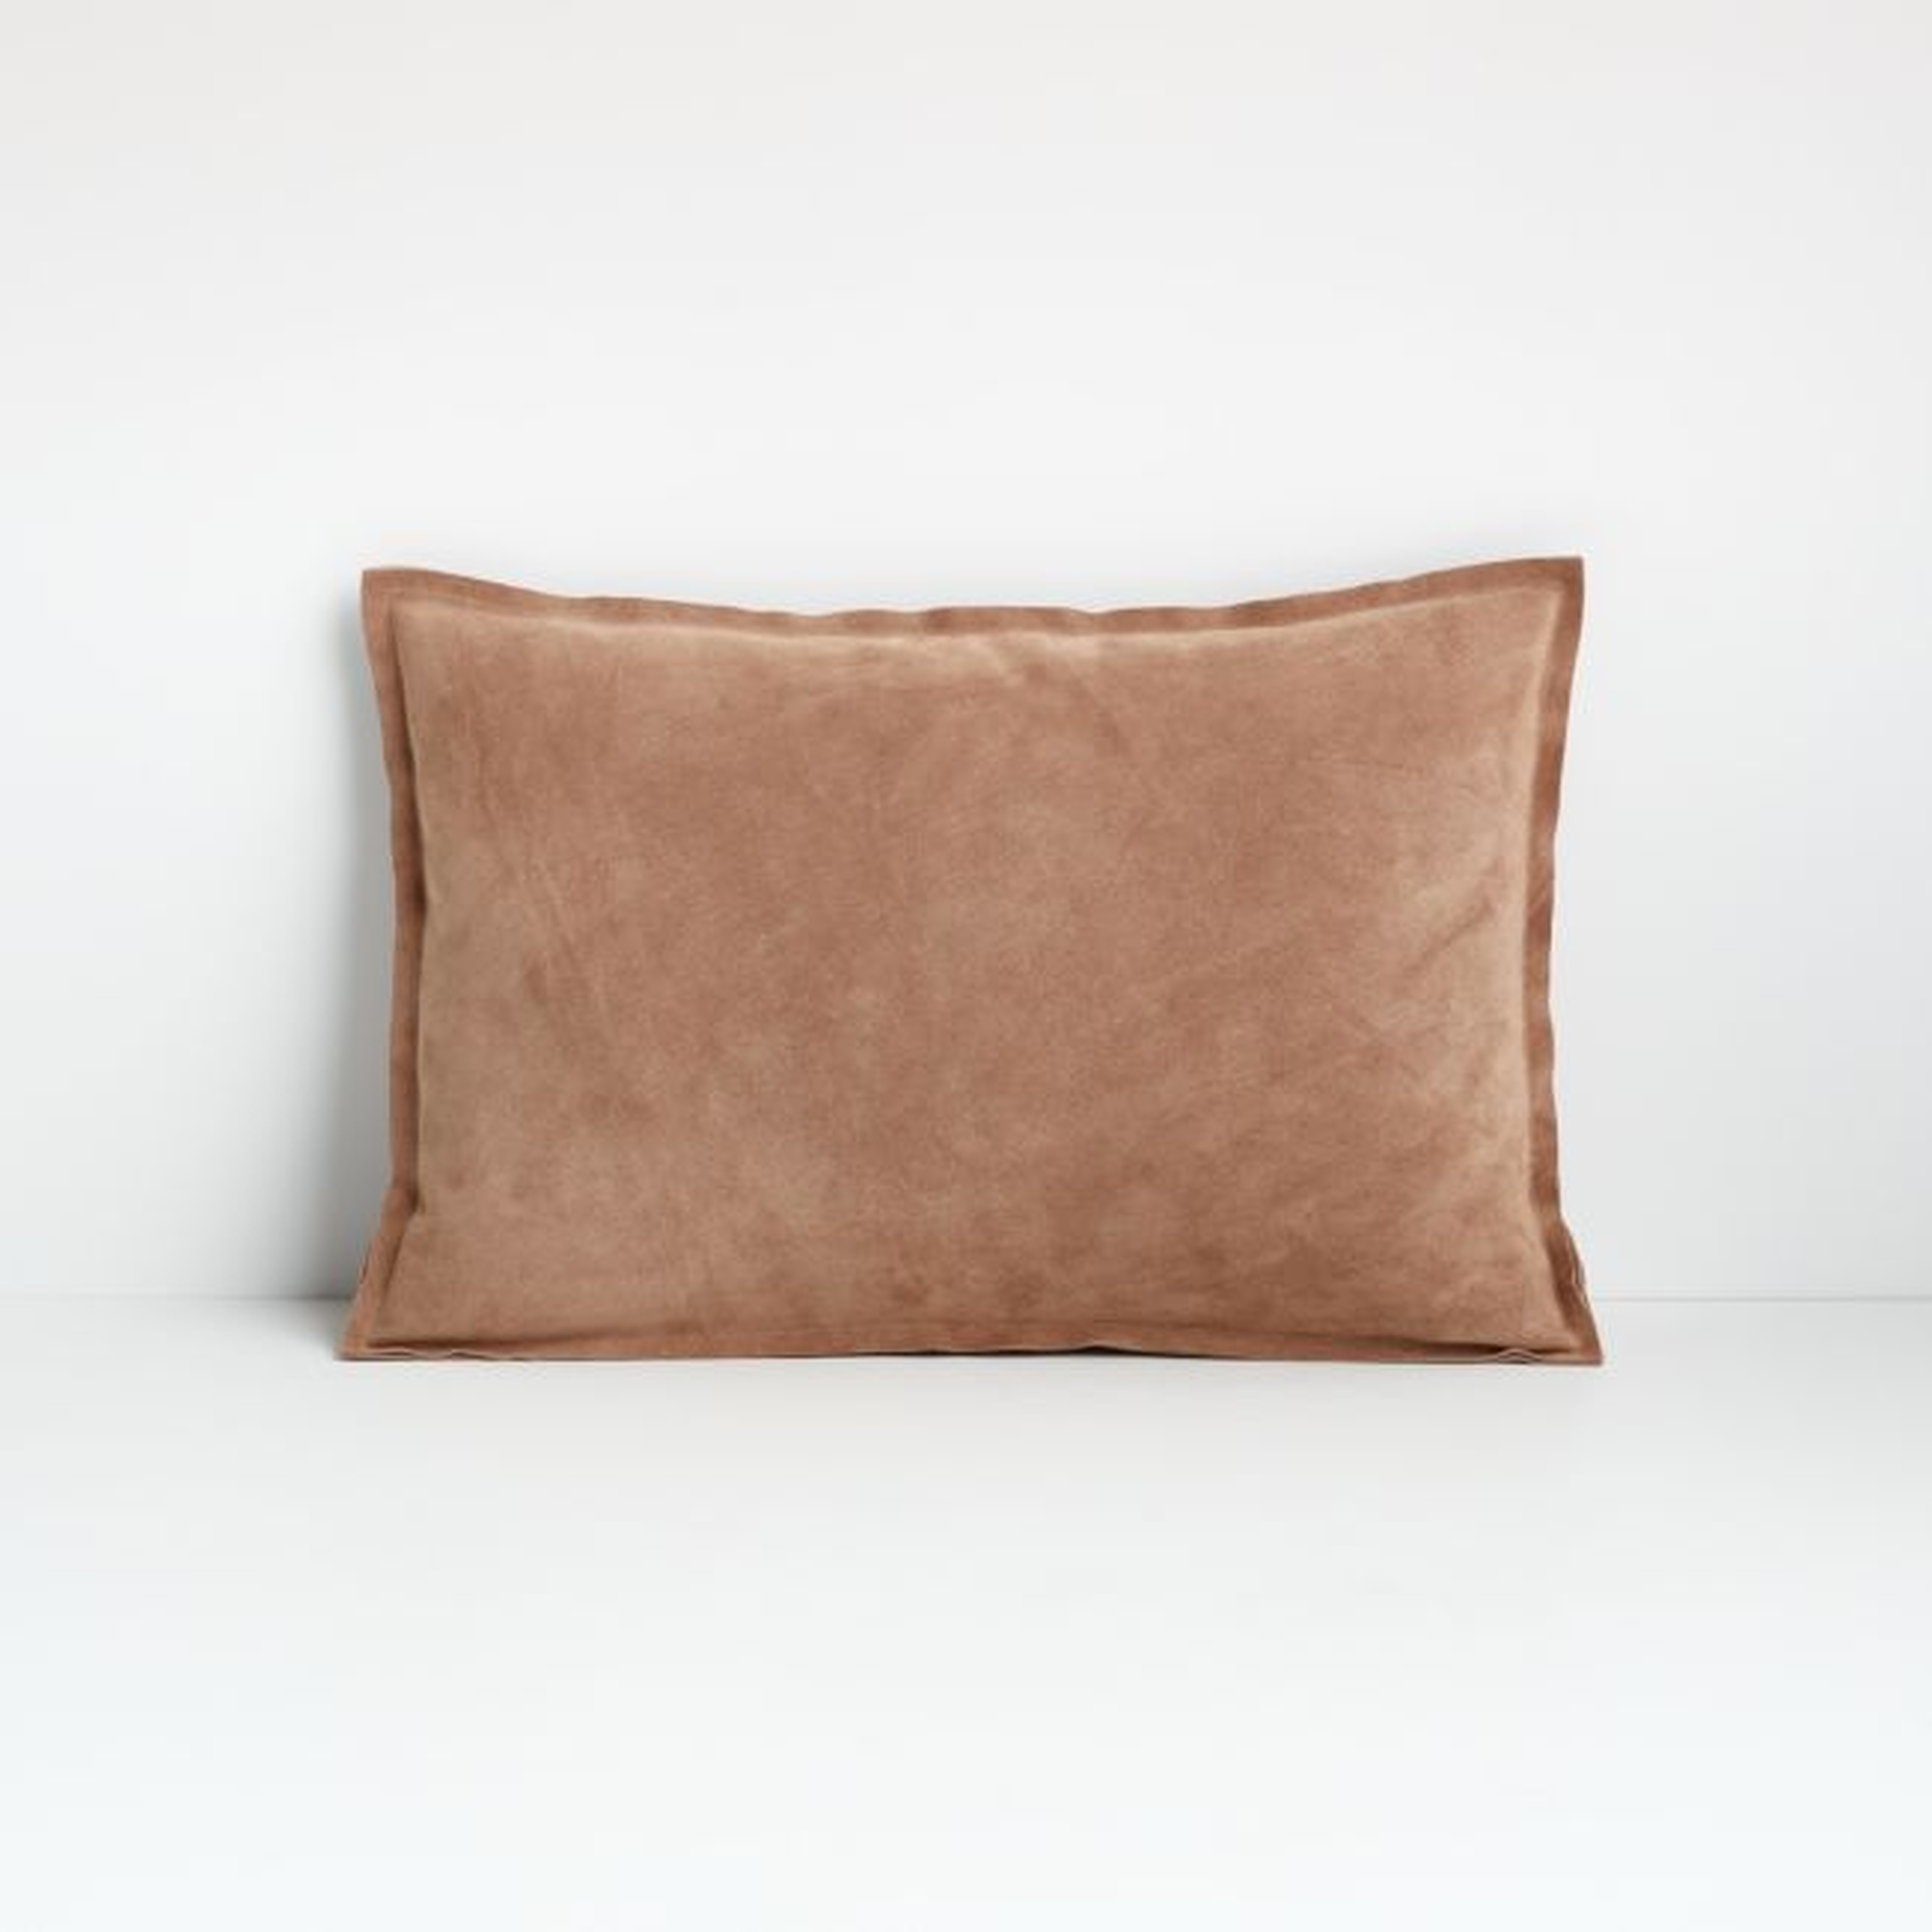 Camito 18"x12" Pillow Cover - Crate and Barrel